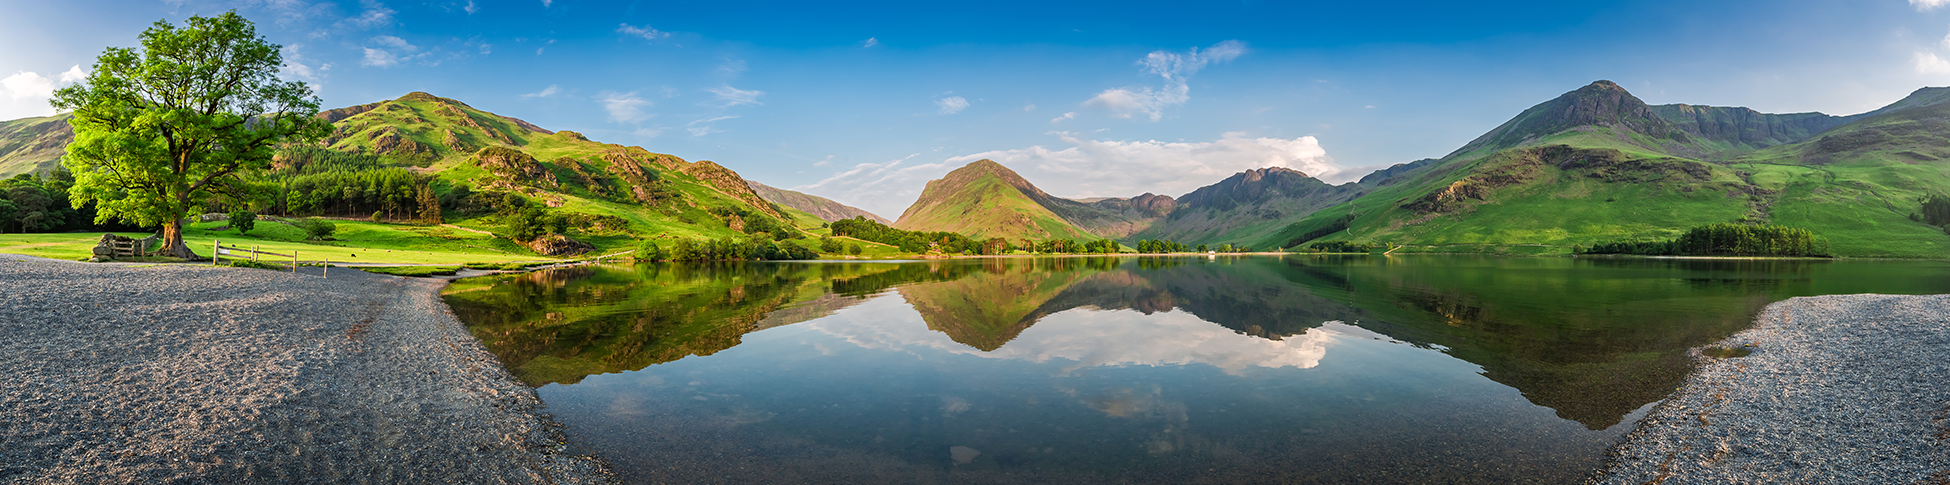 8 Epic Lake District walks you need to do banner image